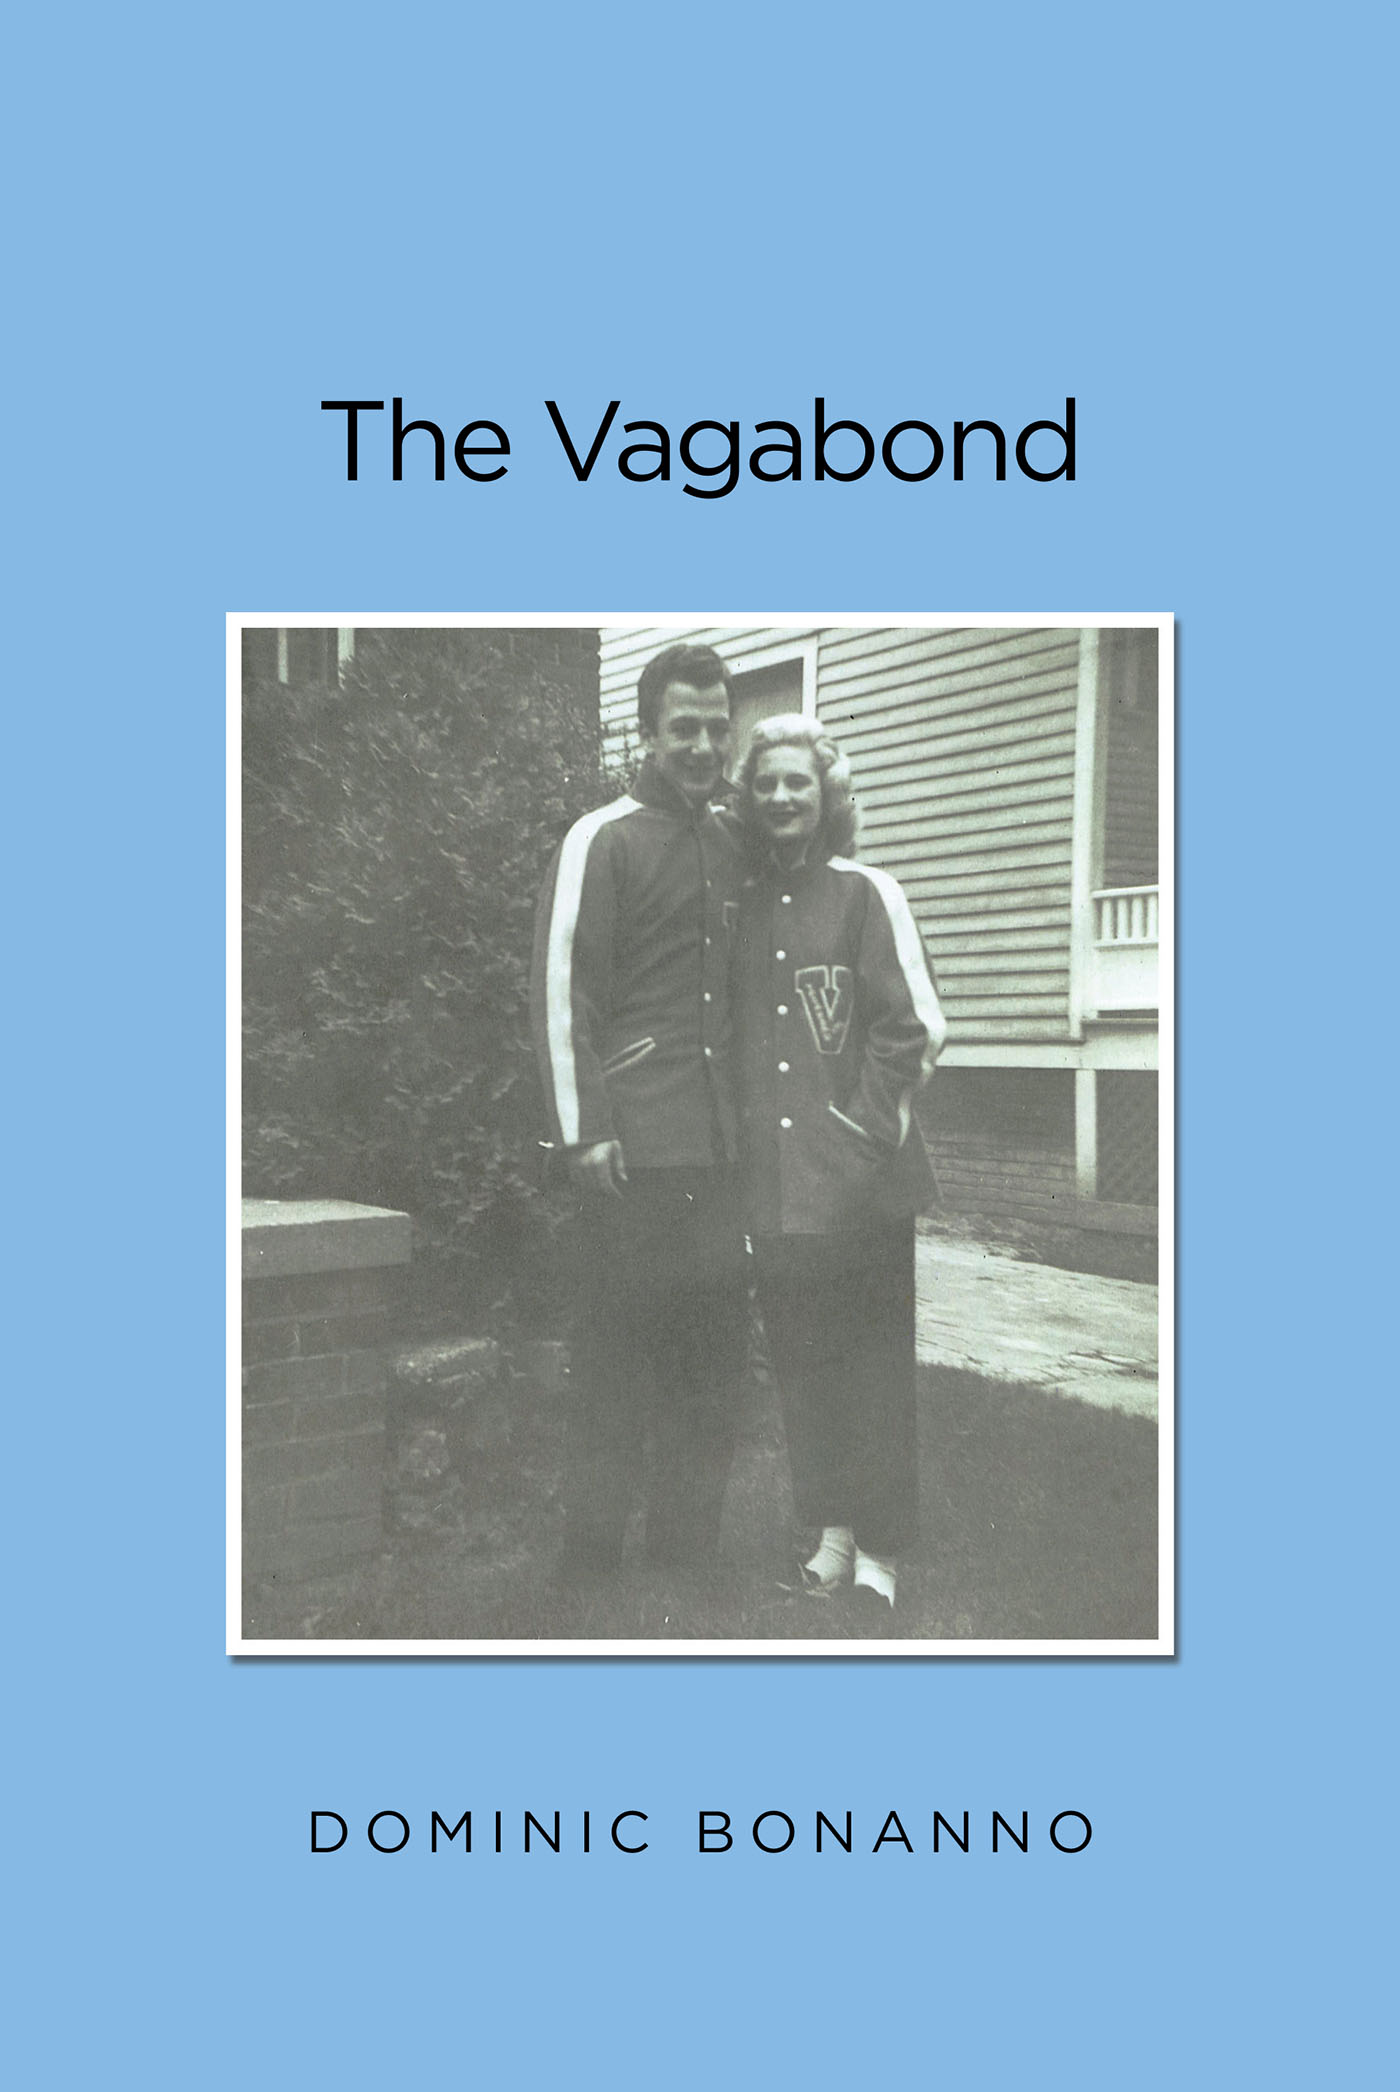 Author Dominic Bonanno’s New Book, "The Vagabond," is a Warmhearted Memoir, Recalling His Depression-Era Childhood and the Simplicity of American Life in a Bygone Era